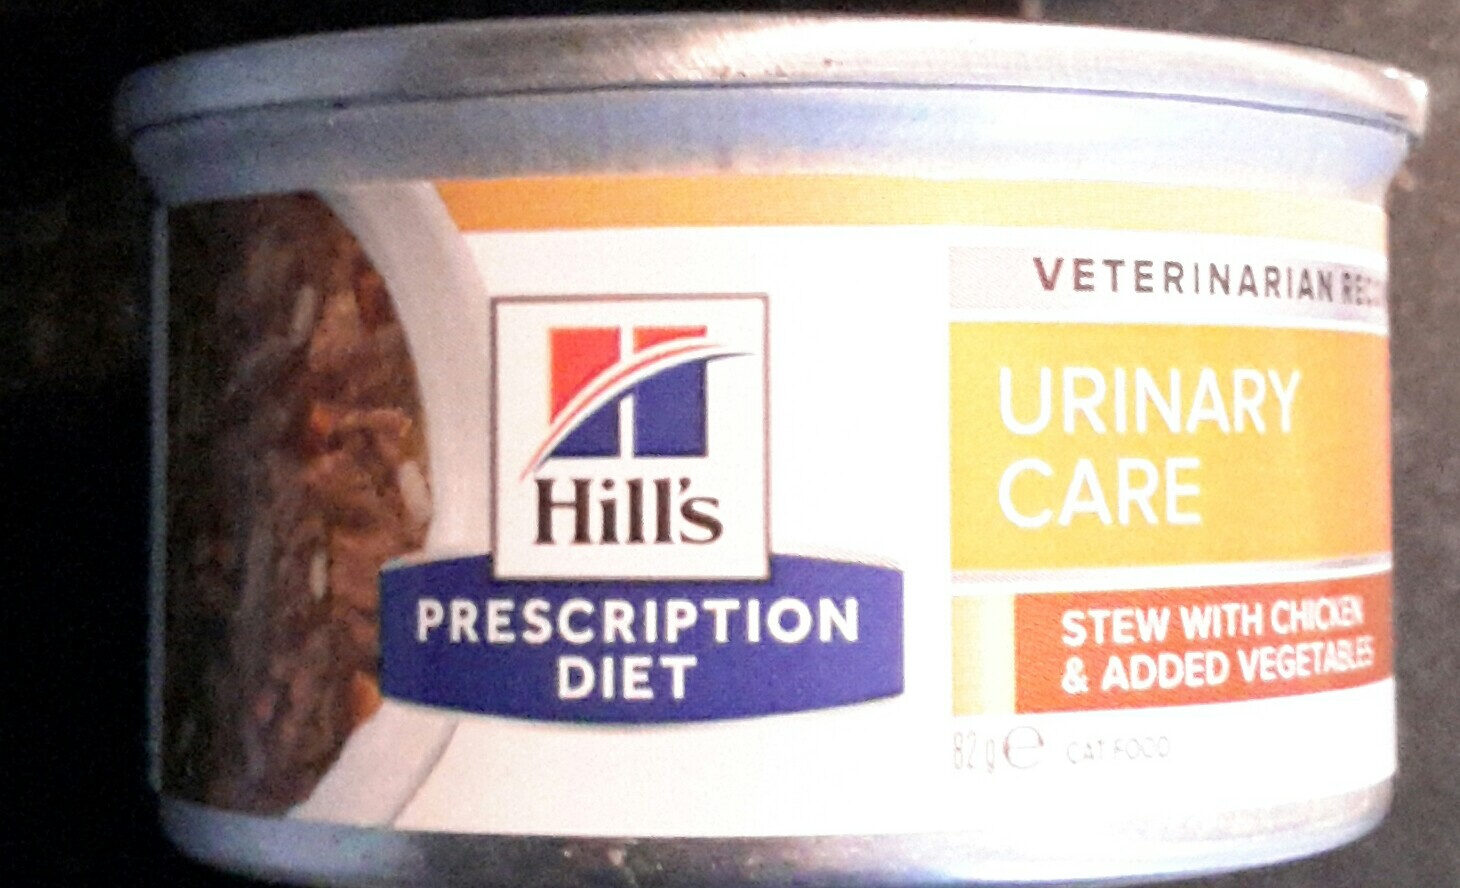 Urinary care c/d multicare stress stew with chicken and added vegetables - Product - en